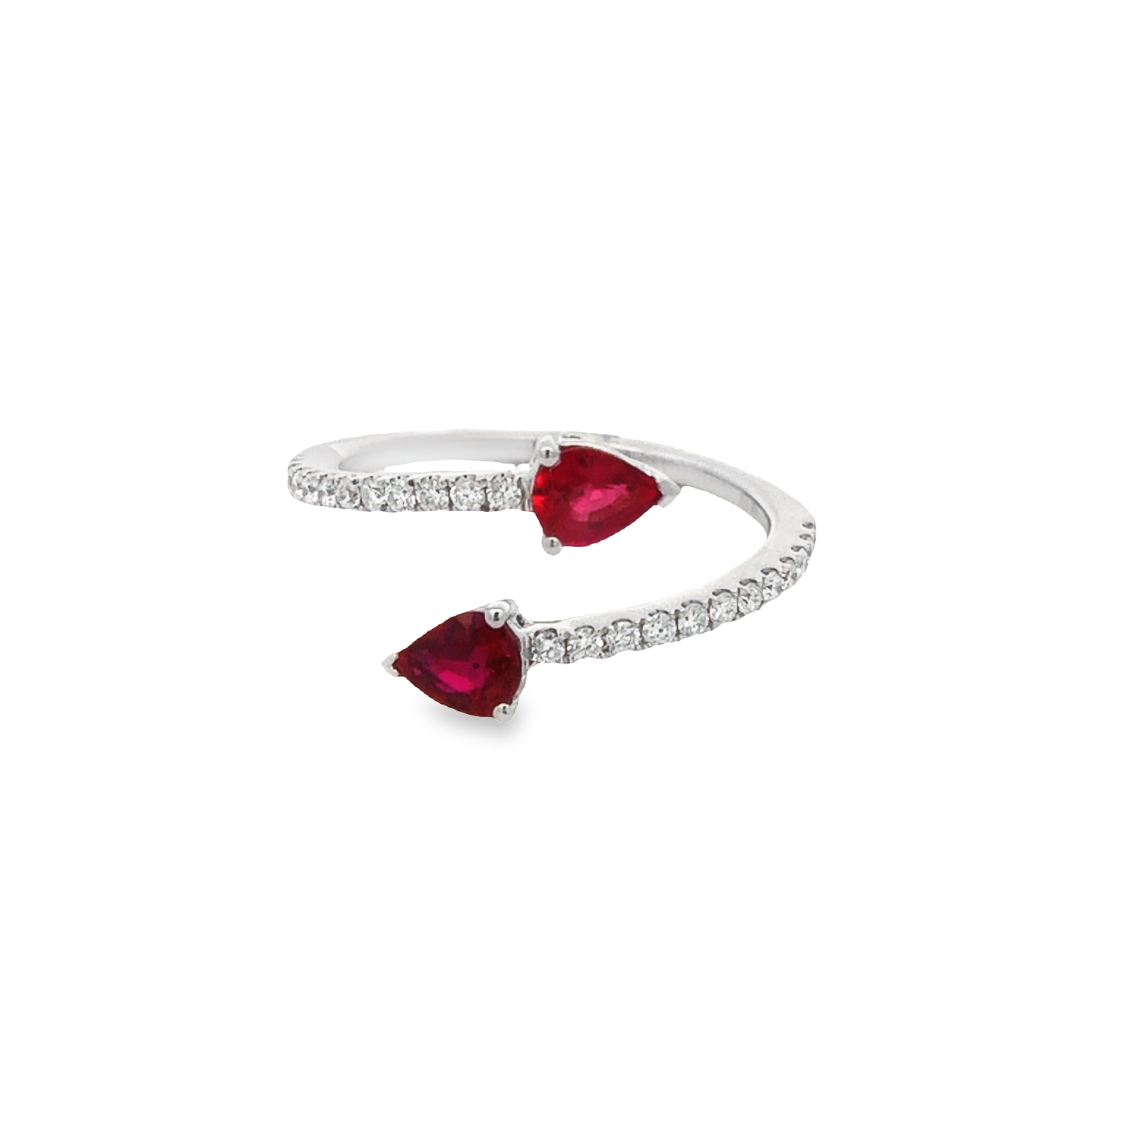 18K White Gold Ruby and Diamond Ring